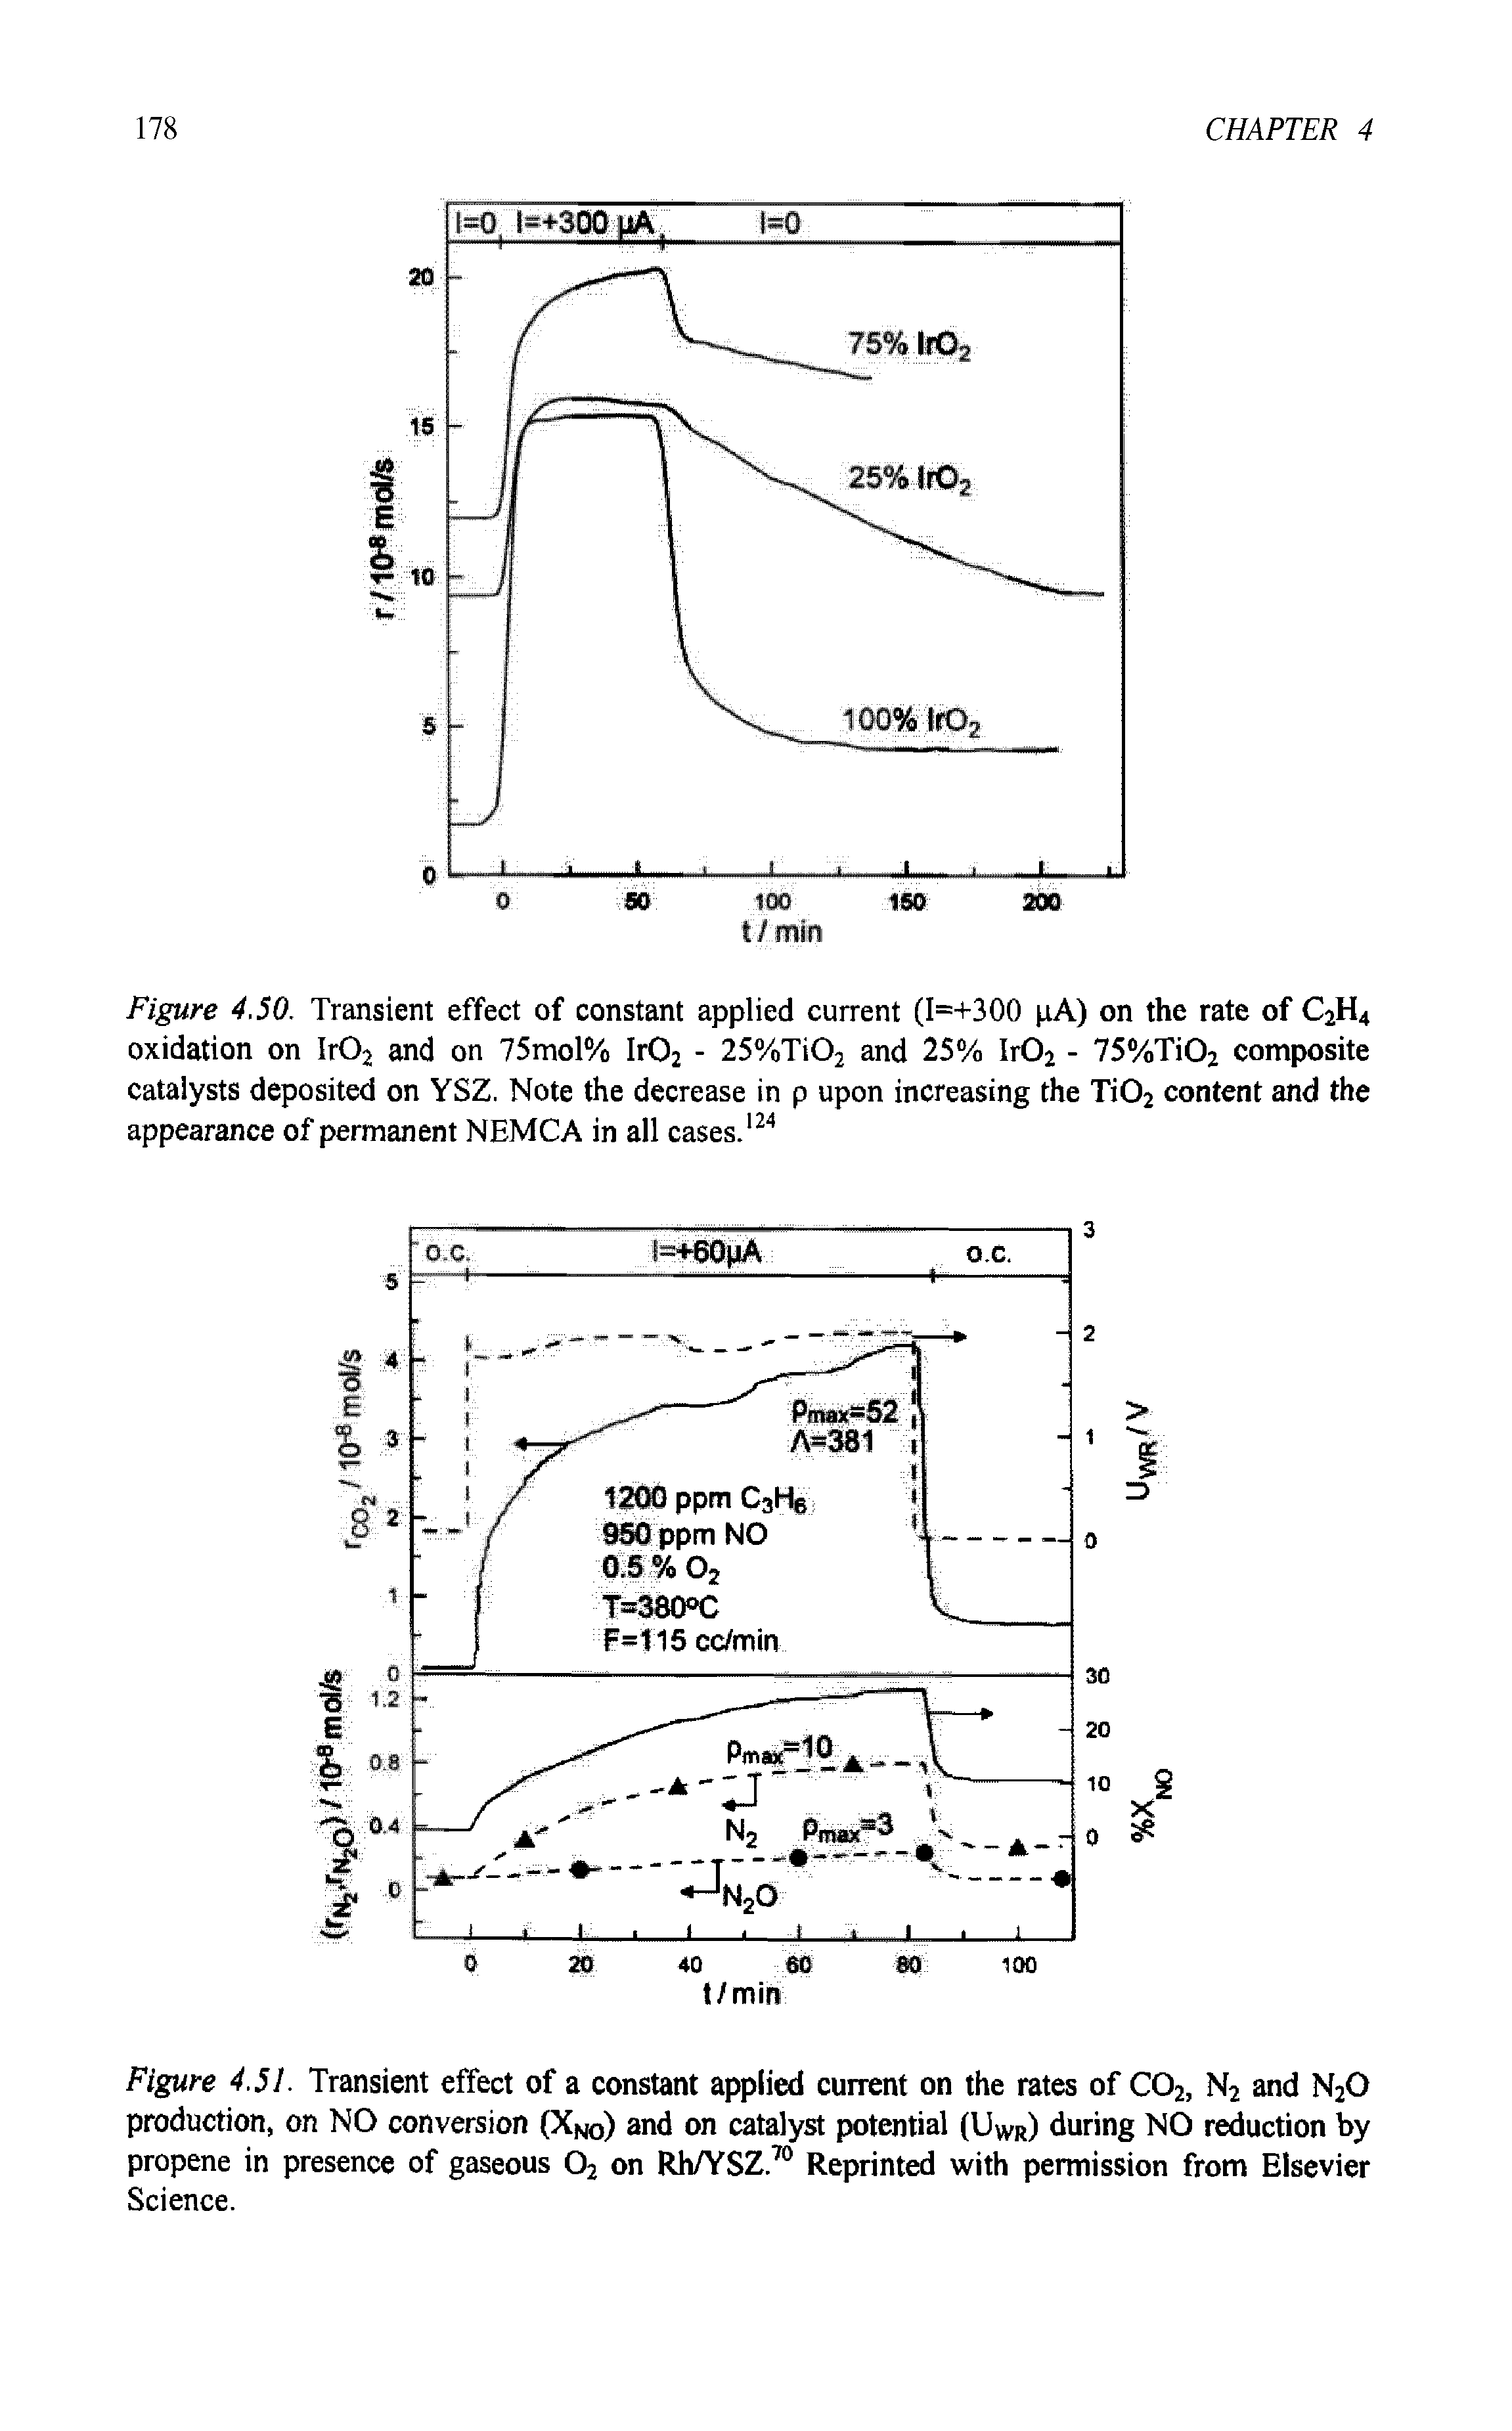 Figure 4.50. Transient effect of constant applied current (I=+300 pA) on the rate of C2H4 oxidation on Ir02 and on 75mol% Ir02 - 25%Ti02 and 25% Ir02 - 75%Ti02 composite catalysts deposited on YSZ. Note the decrease in p upon increasing the Ti02 content and the appearance of permanent NEMCA in all cases.124...